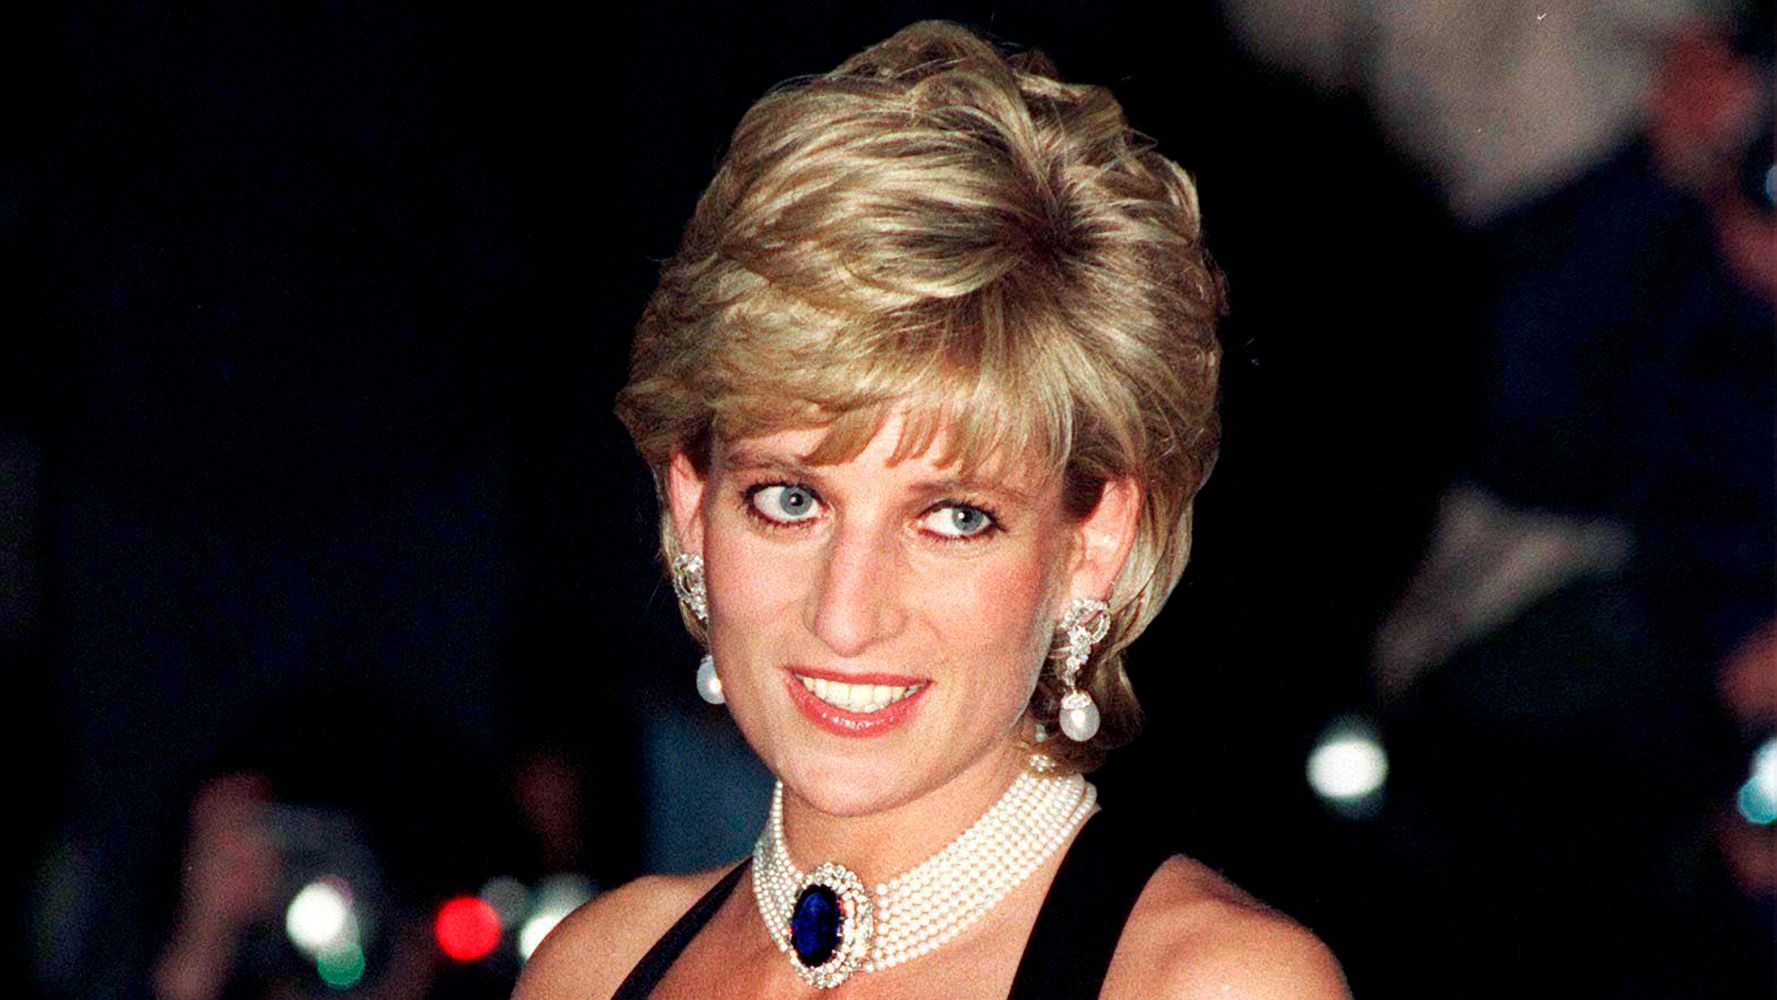 Supporters Remember Princess Diana Ahead Of Late Royal's 60th Birthday